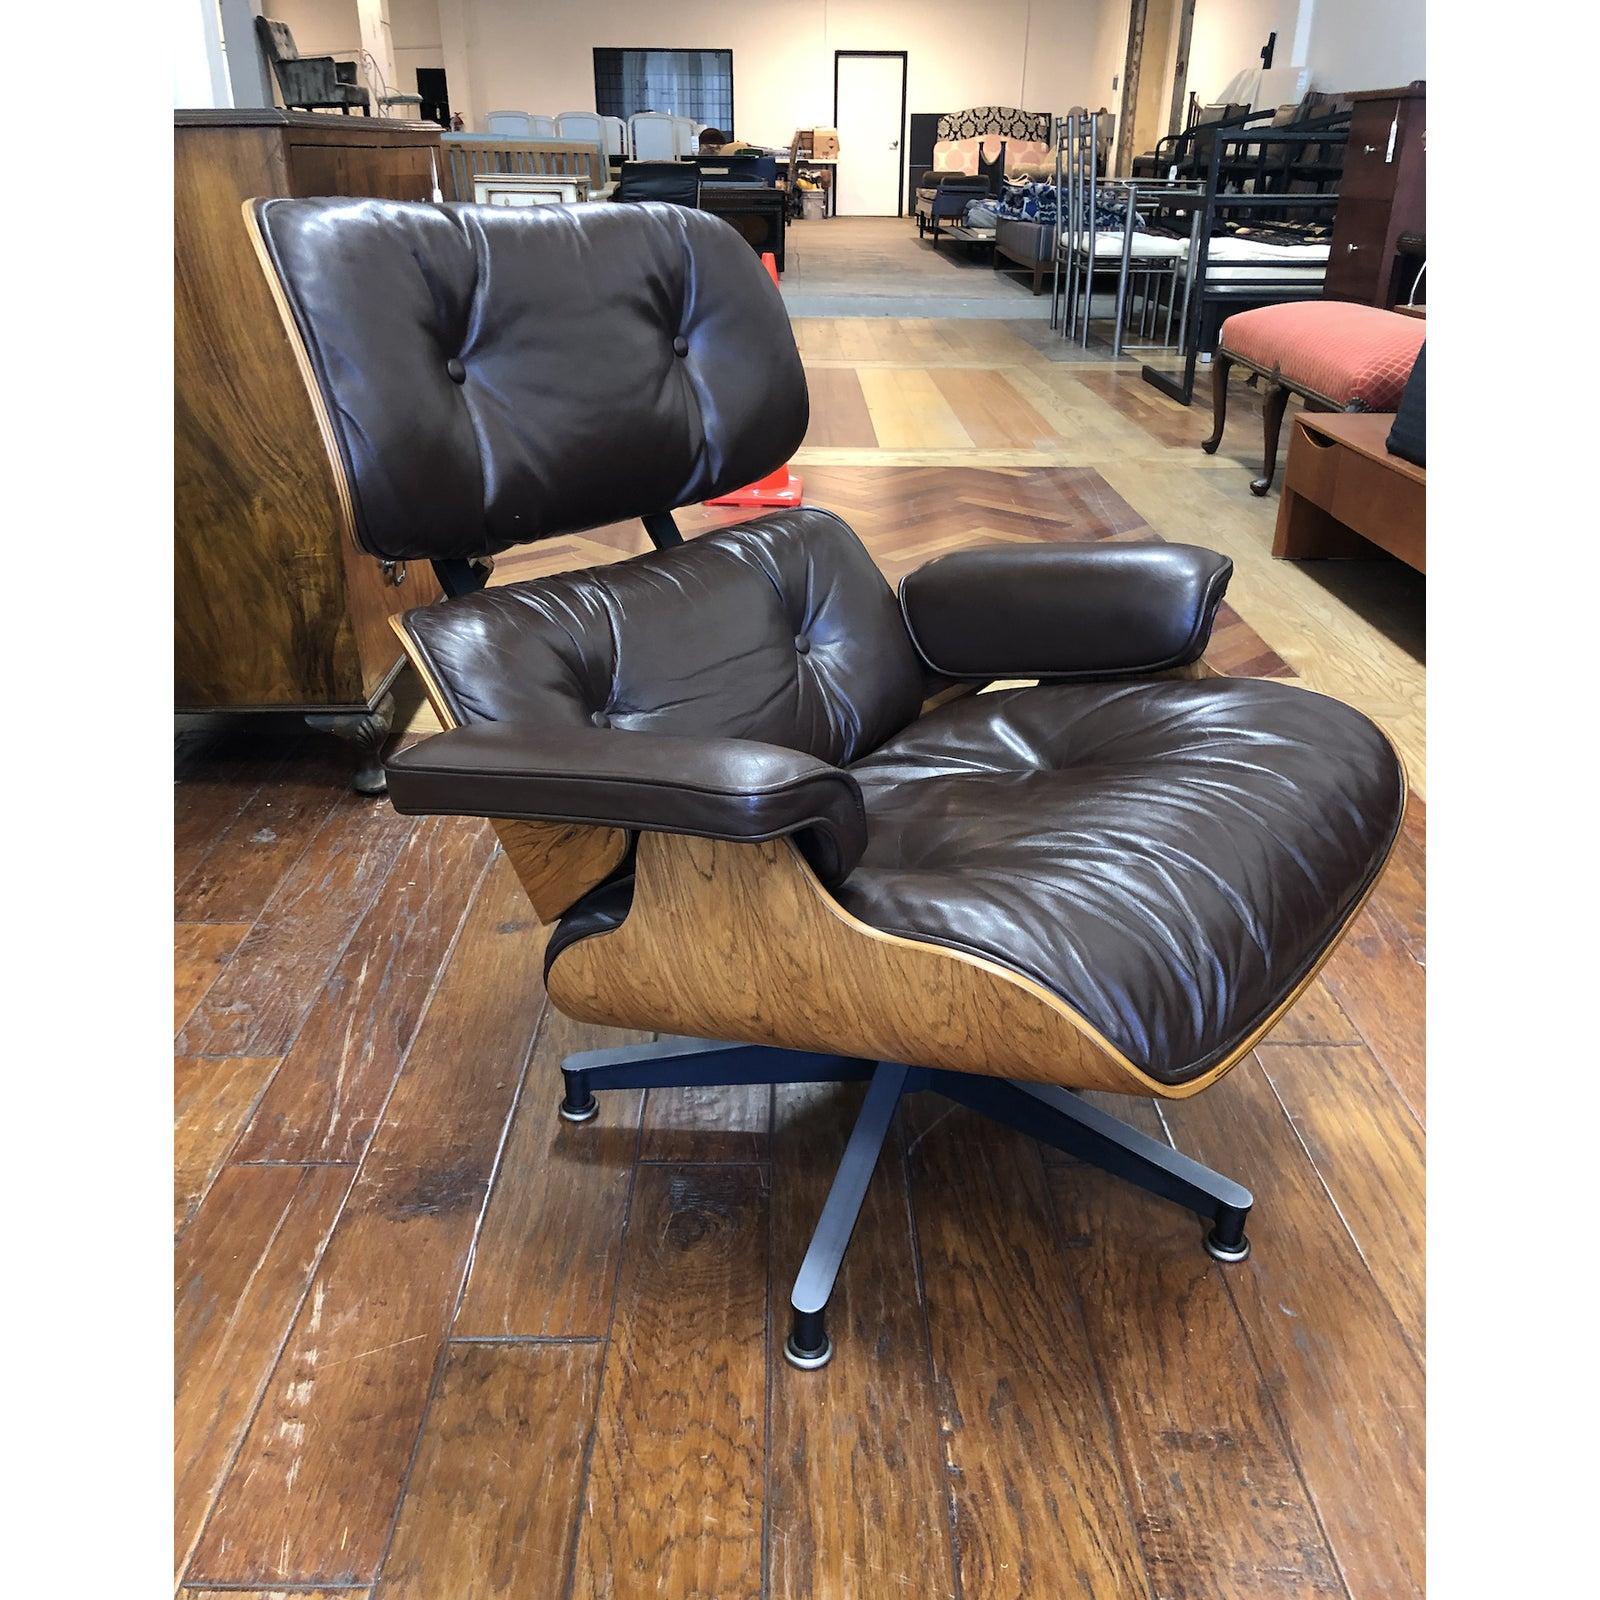 Eames lounge chair by Herman Miller in brown leather.

The Eames pioneering effort defines what it means to lounge. This iconic chair is considered one of the most significant designs of the 20th century. A combination of soft leather with five